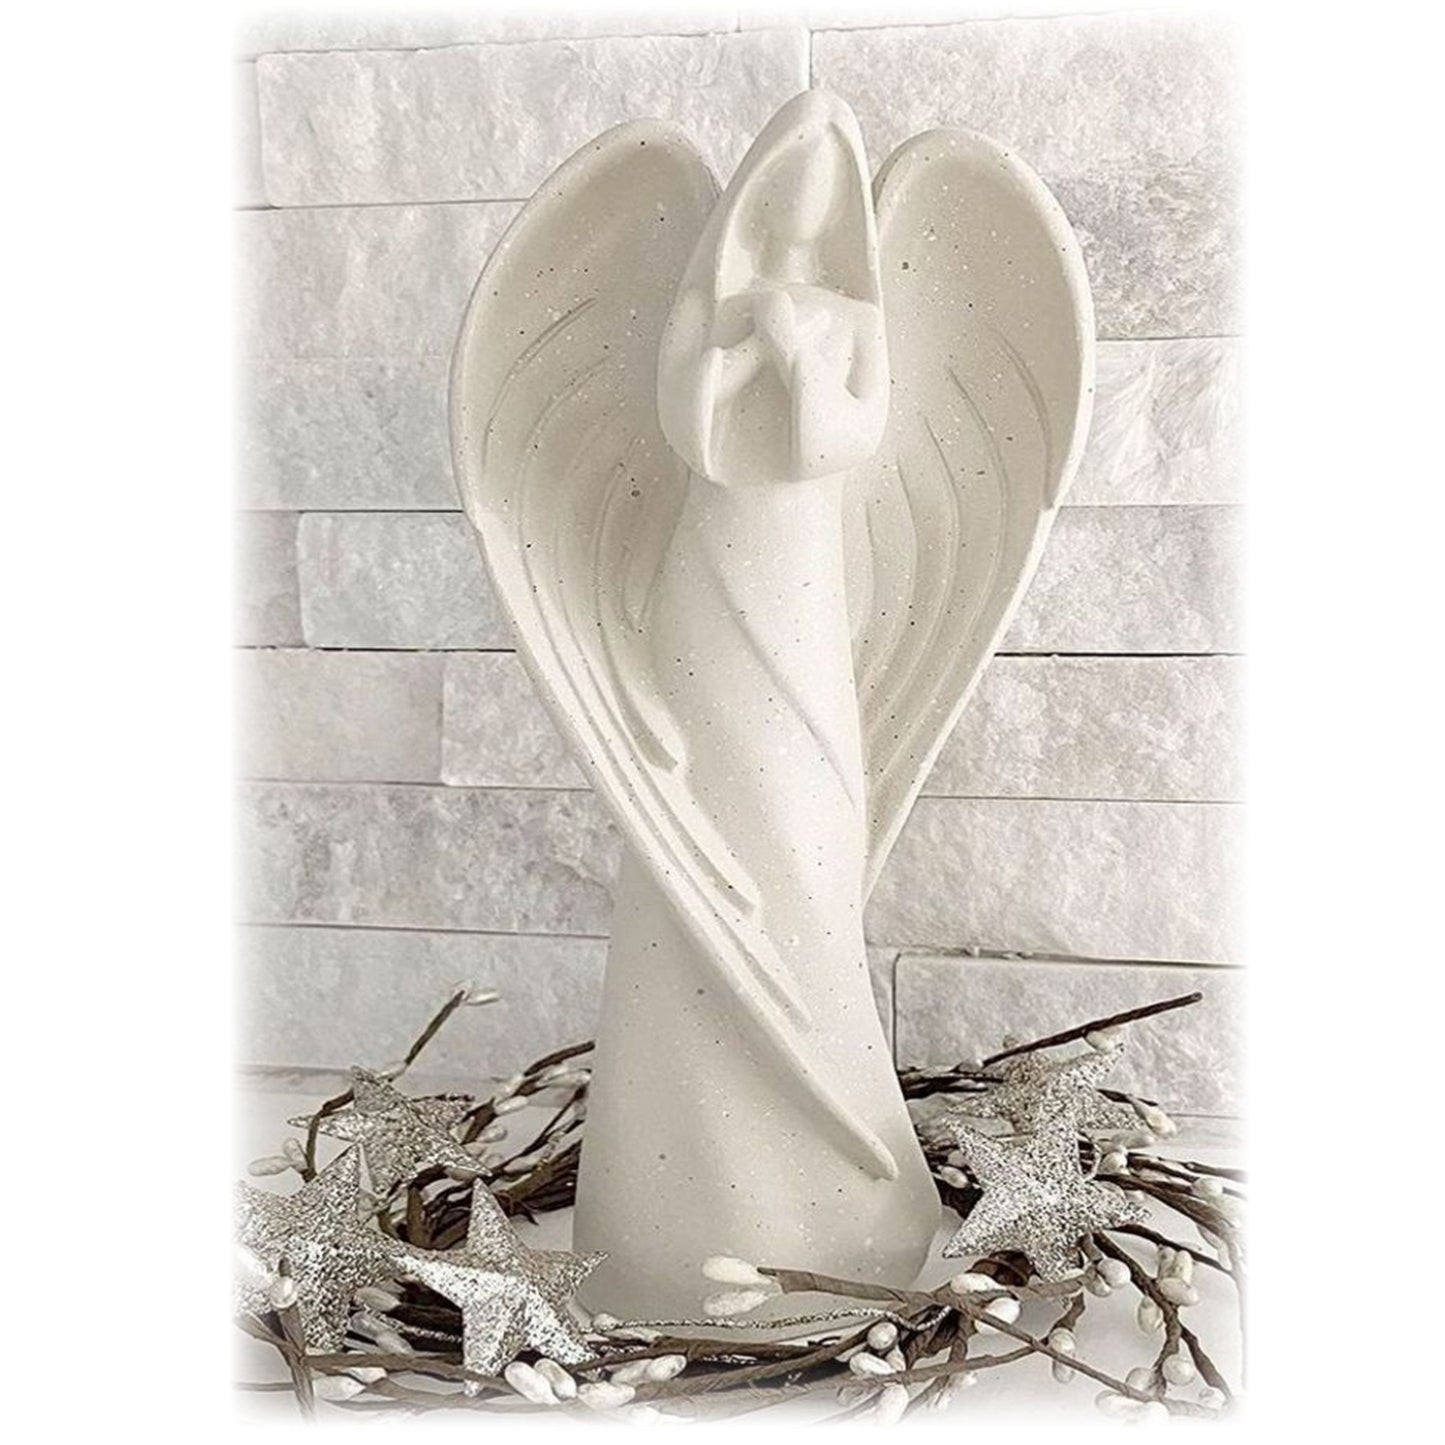 Christmas Angel Statue, Unique Holiday Gift, Decoration with Star Glitter Wreath